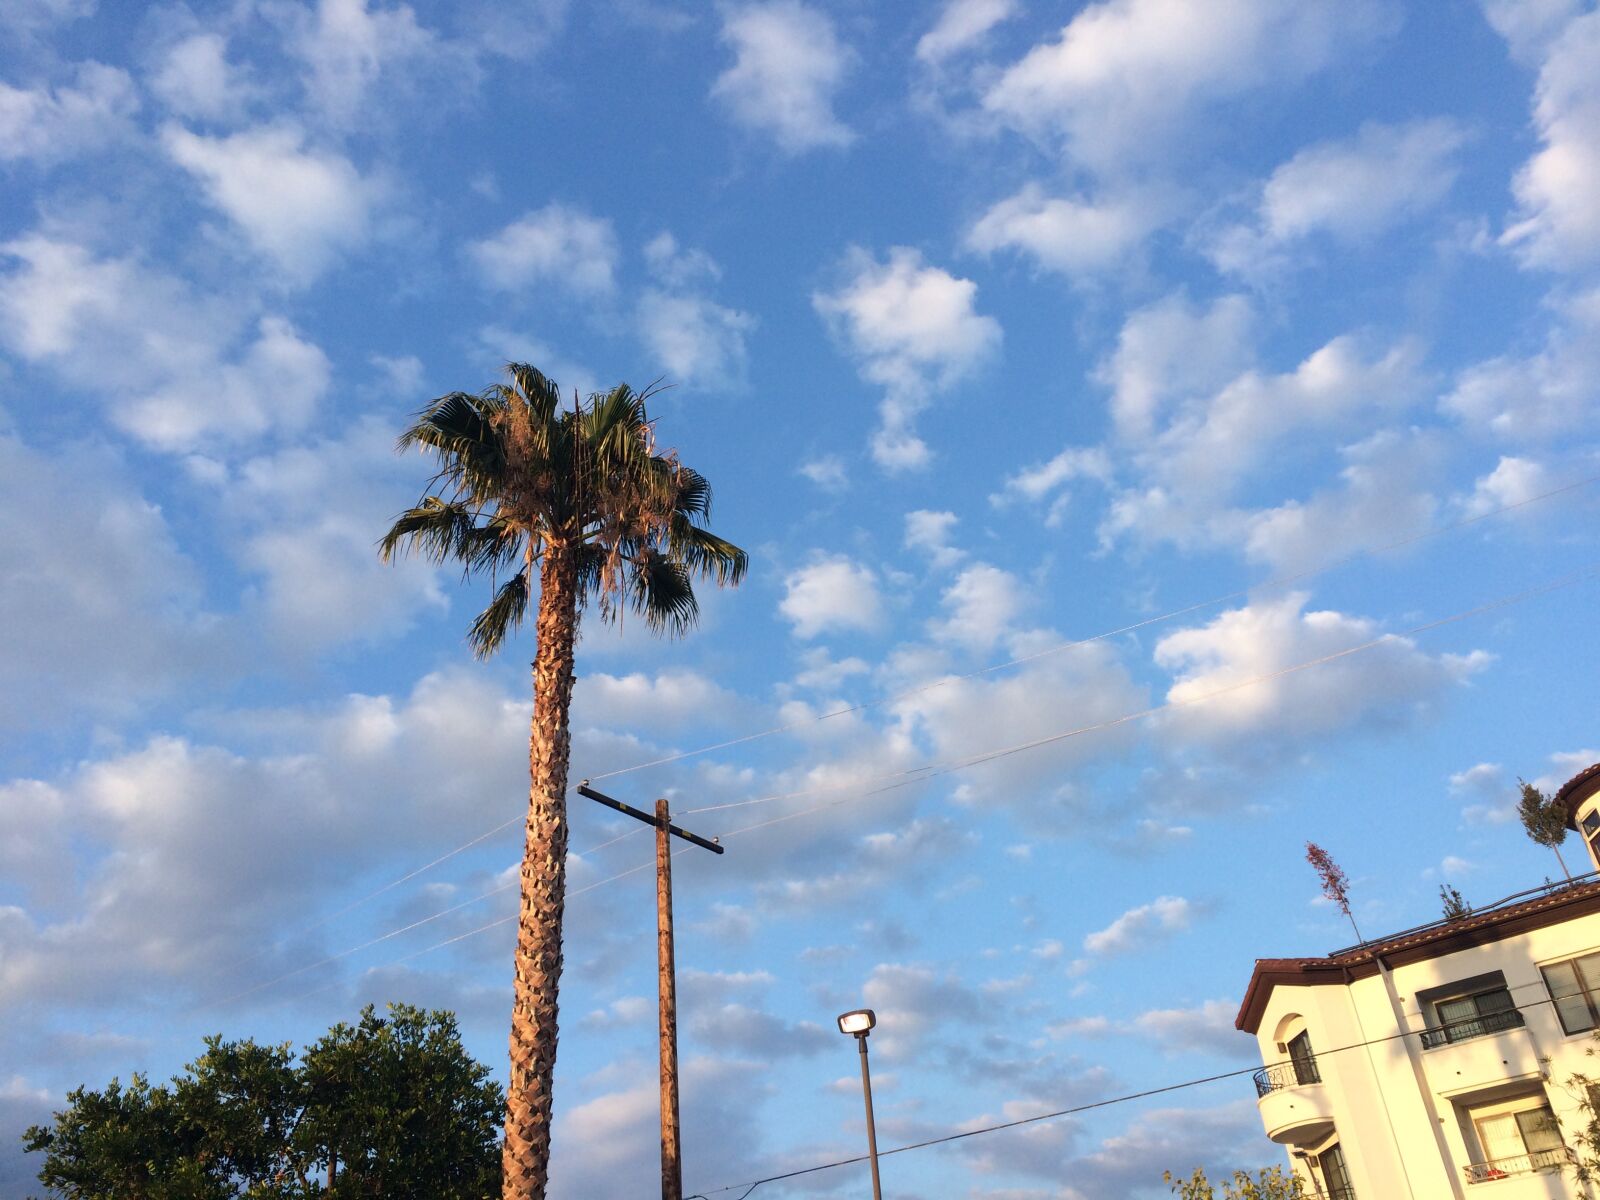 Apple iPhone 5s + iPhone 5s back camera 4.15mm f/2.2 sample photo. Clouds, palm trees, sky photography